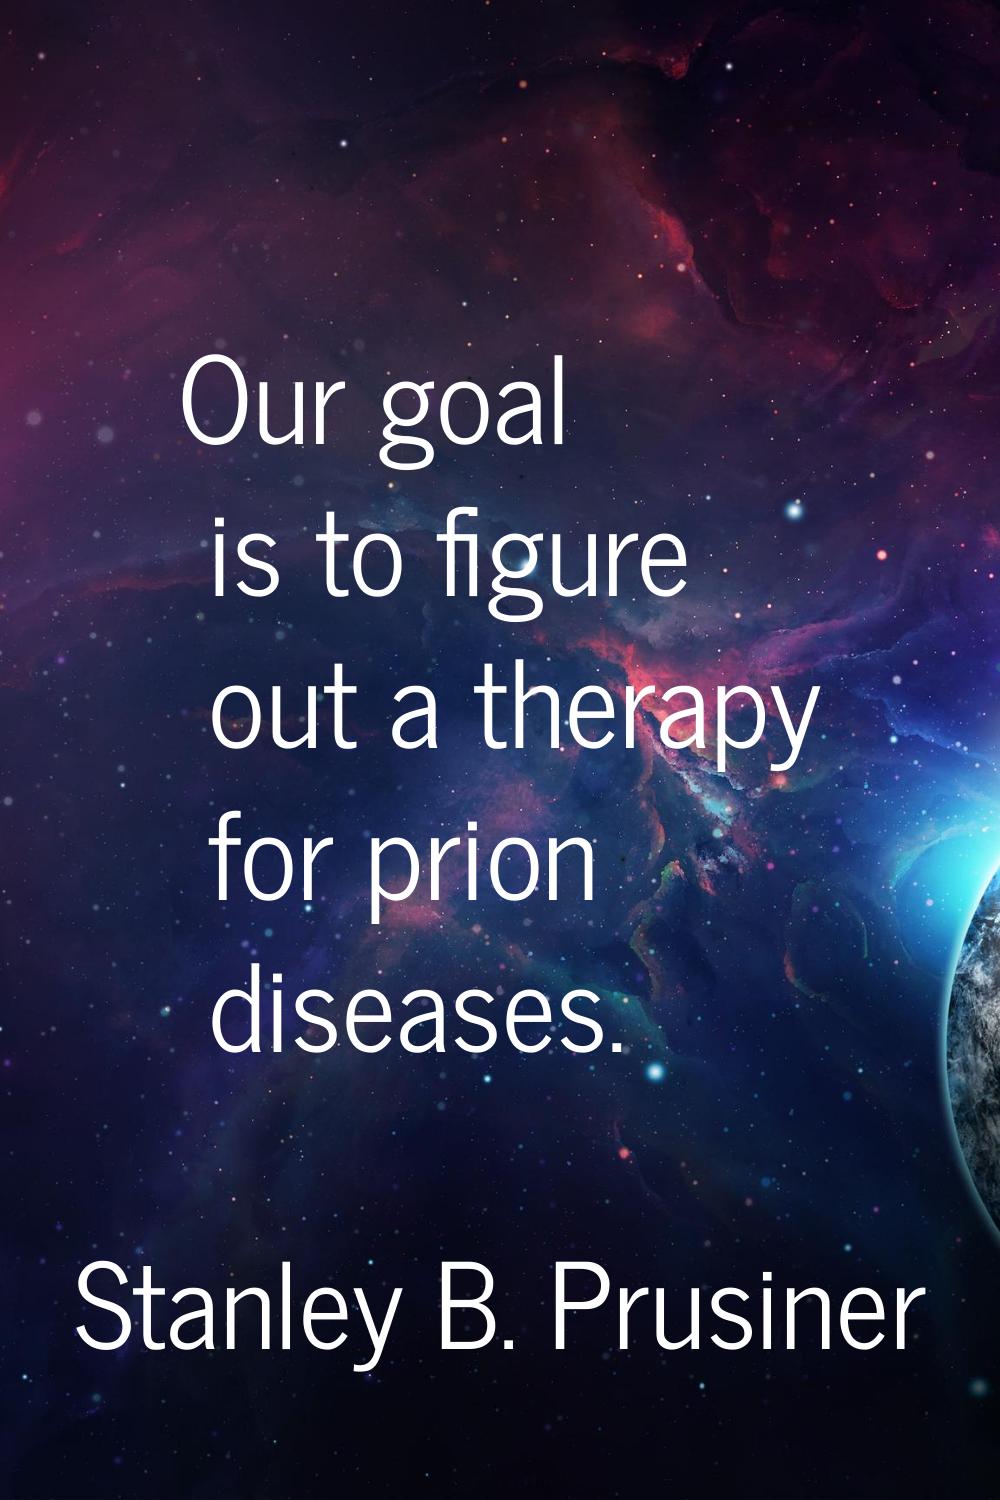 Our goal is to figure out a therapy for prion diseases.